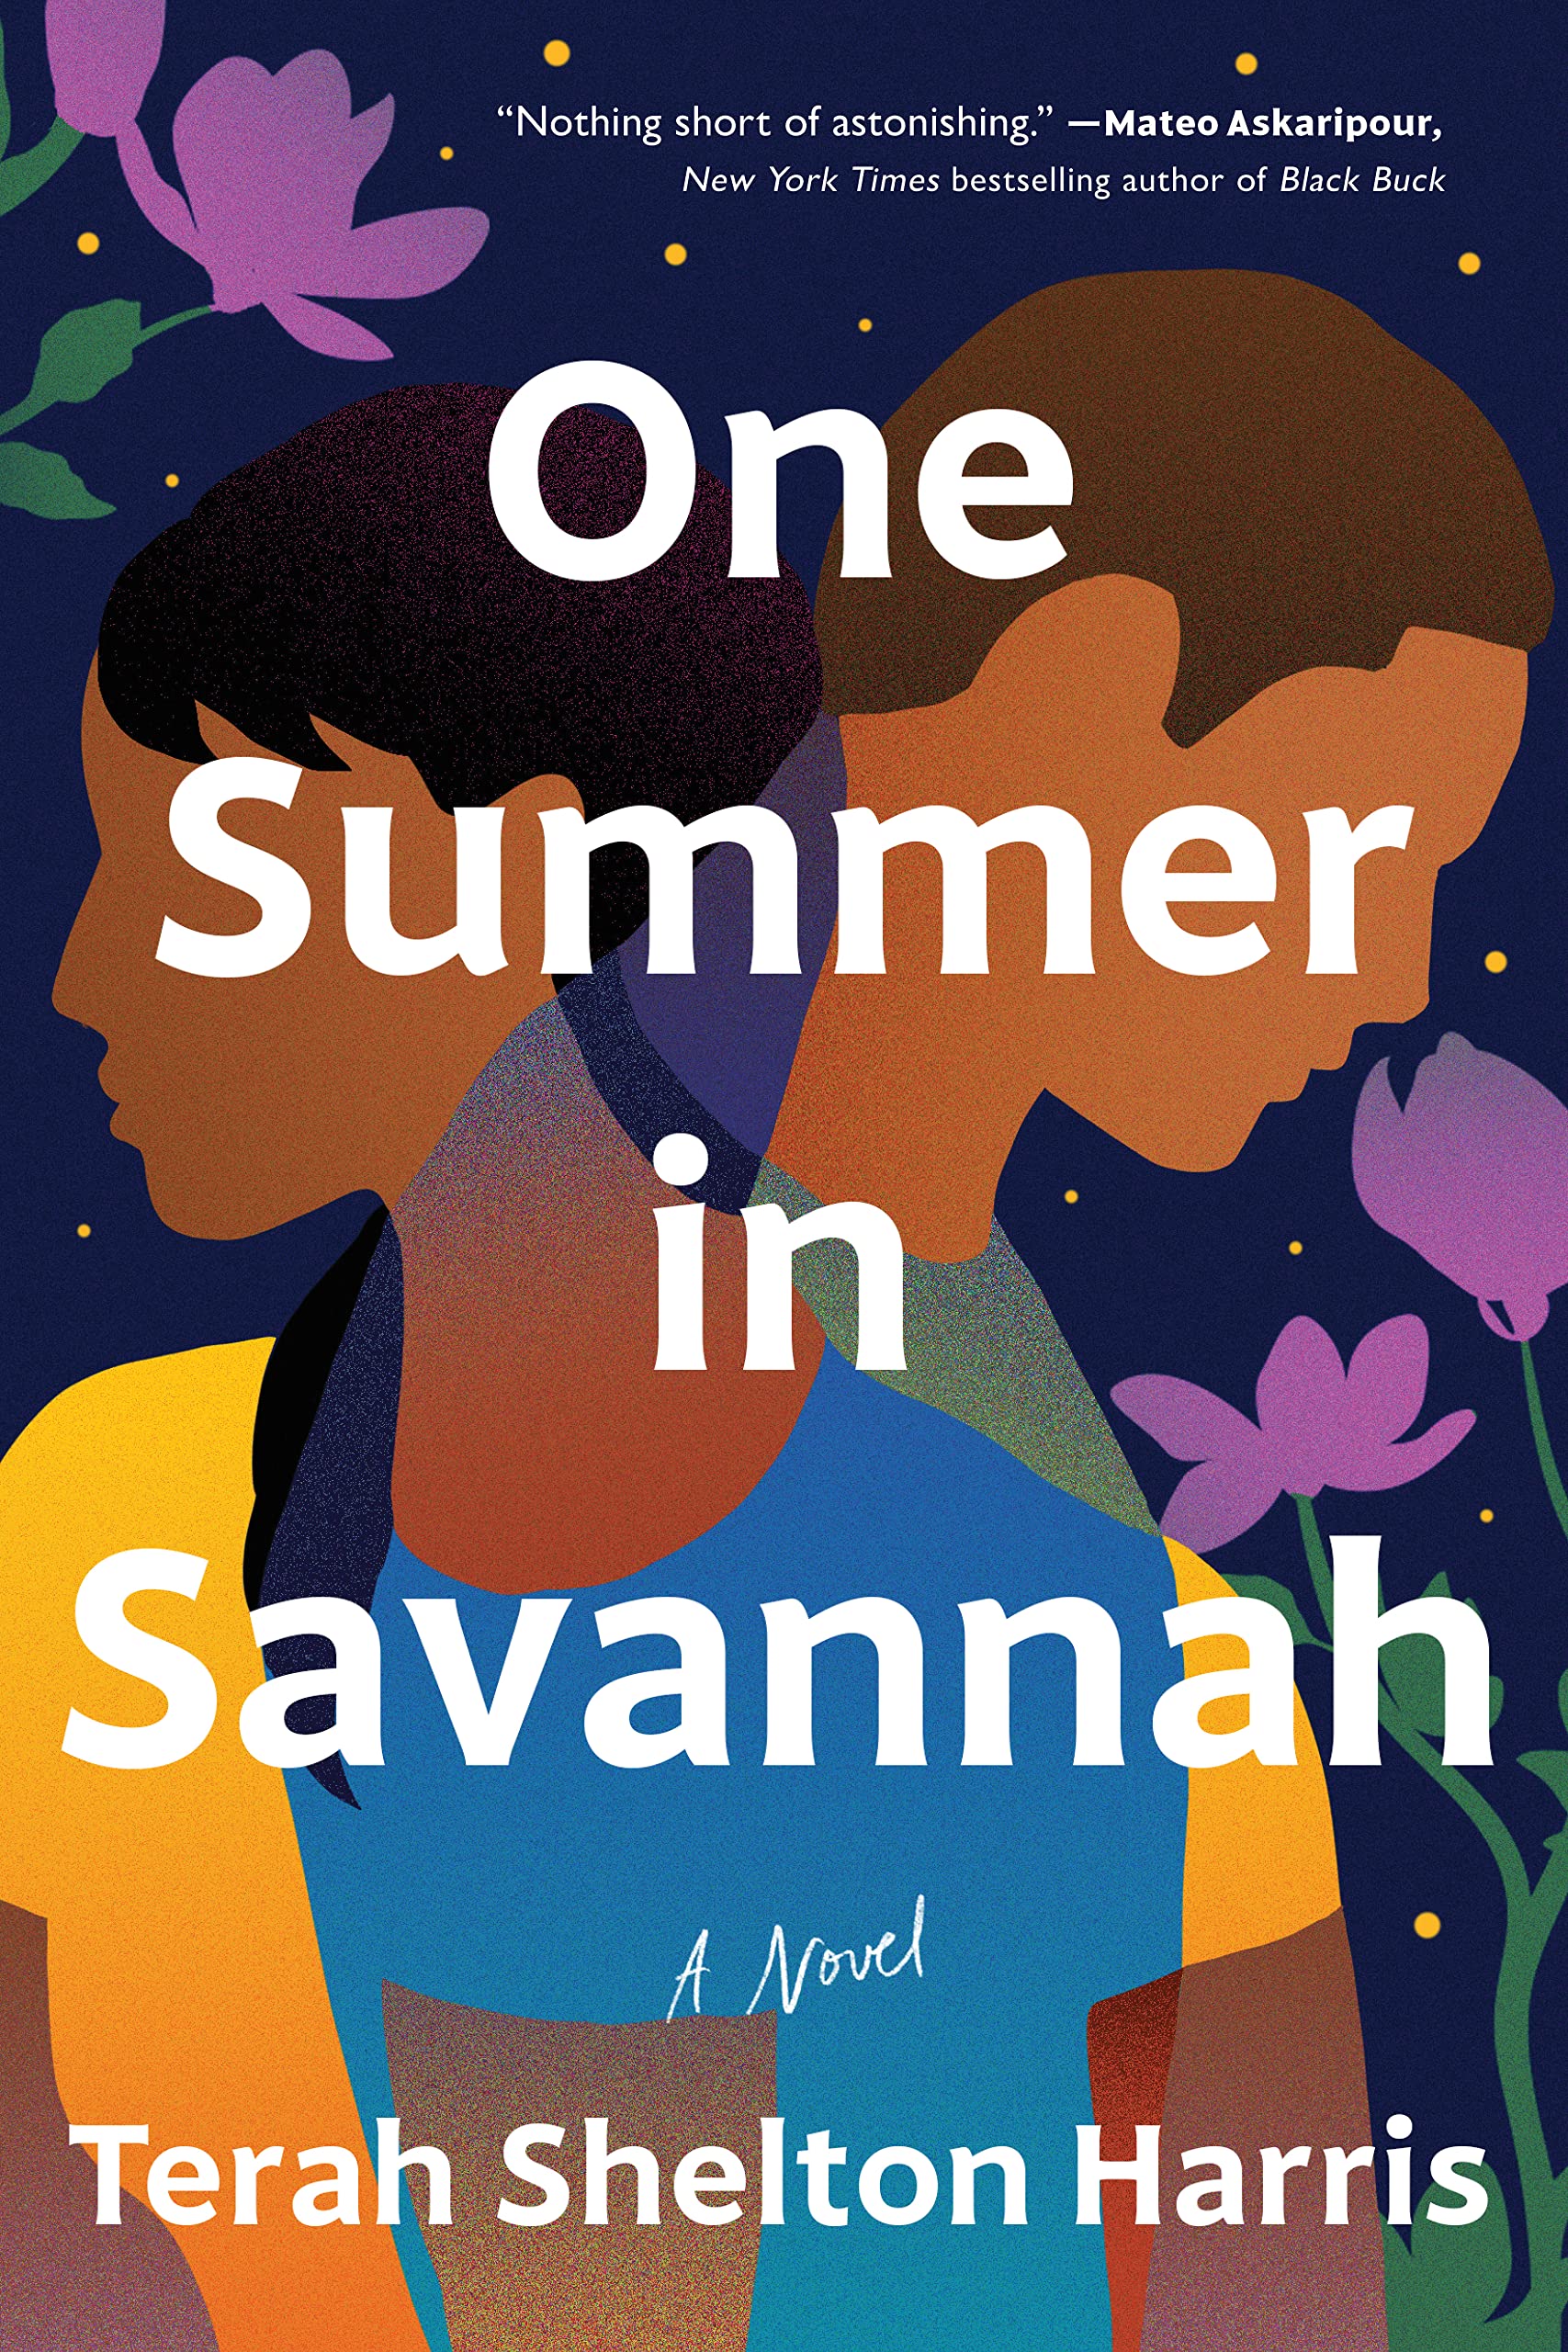 Image for "One Summer in Savannah"